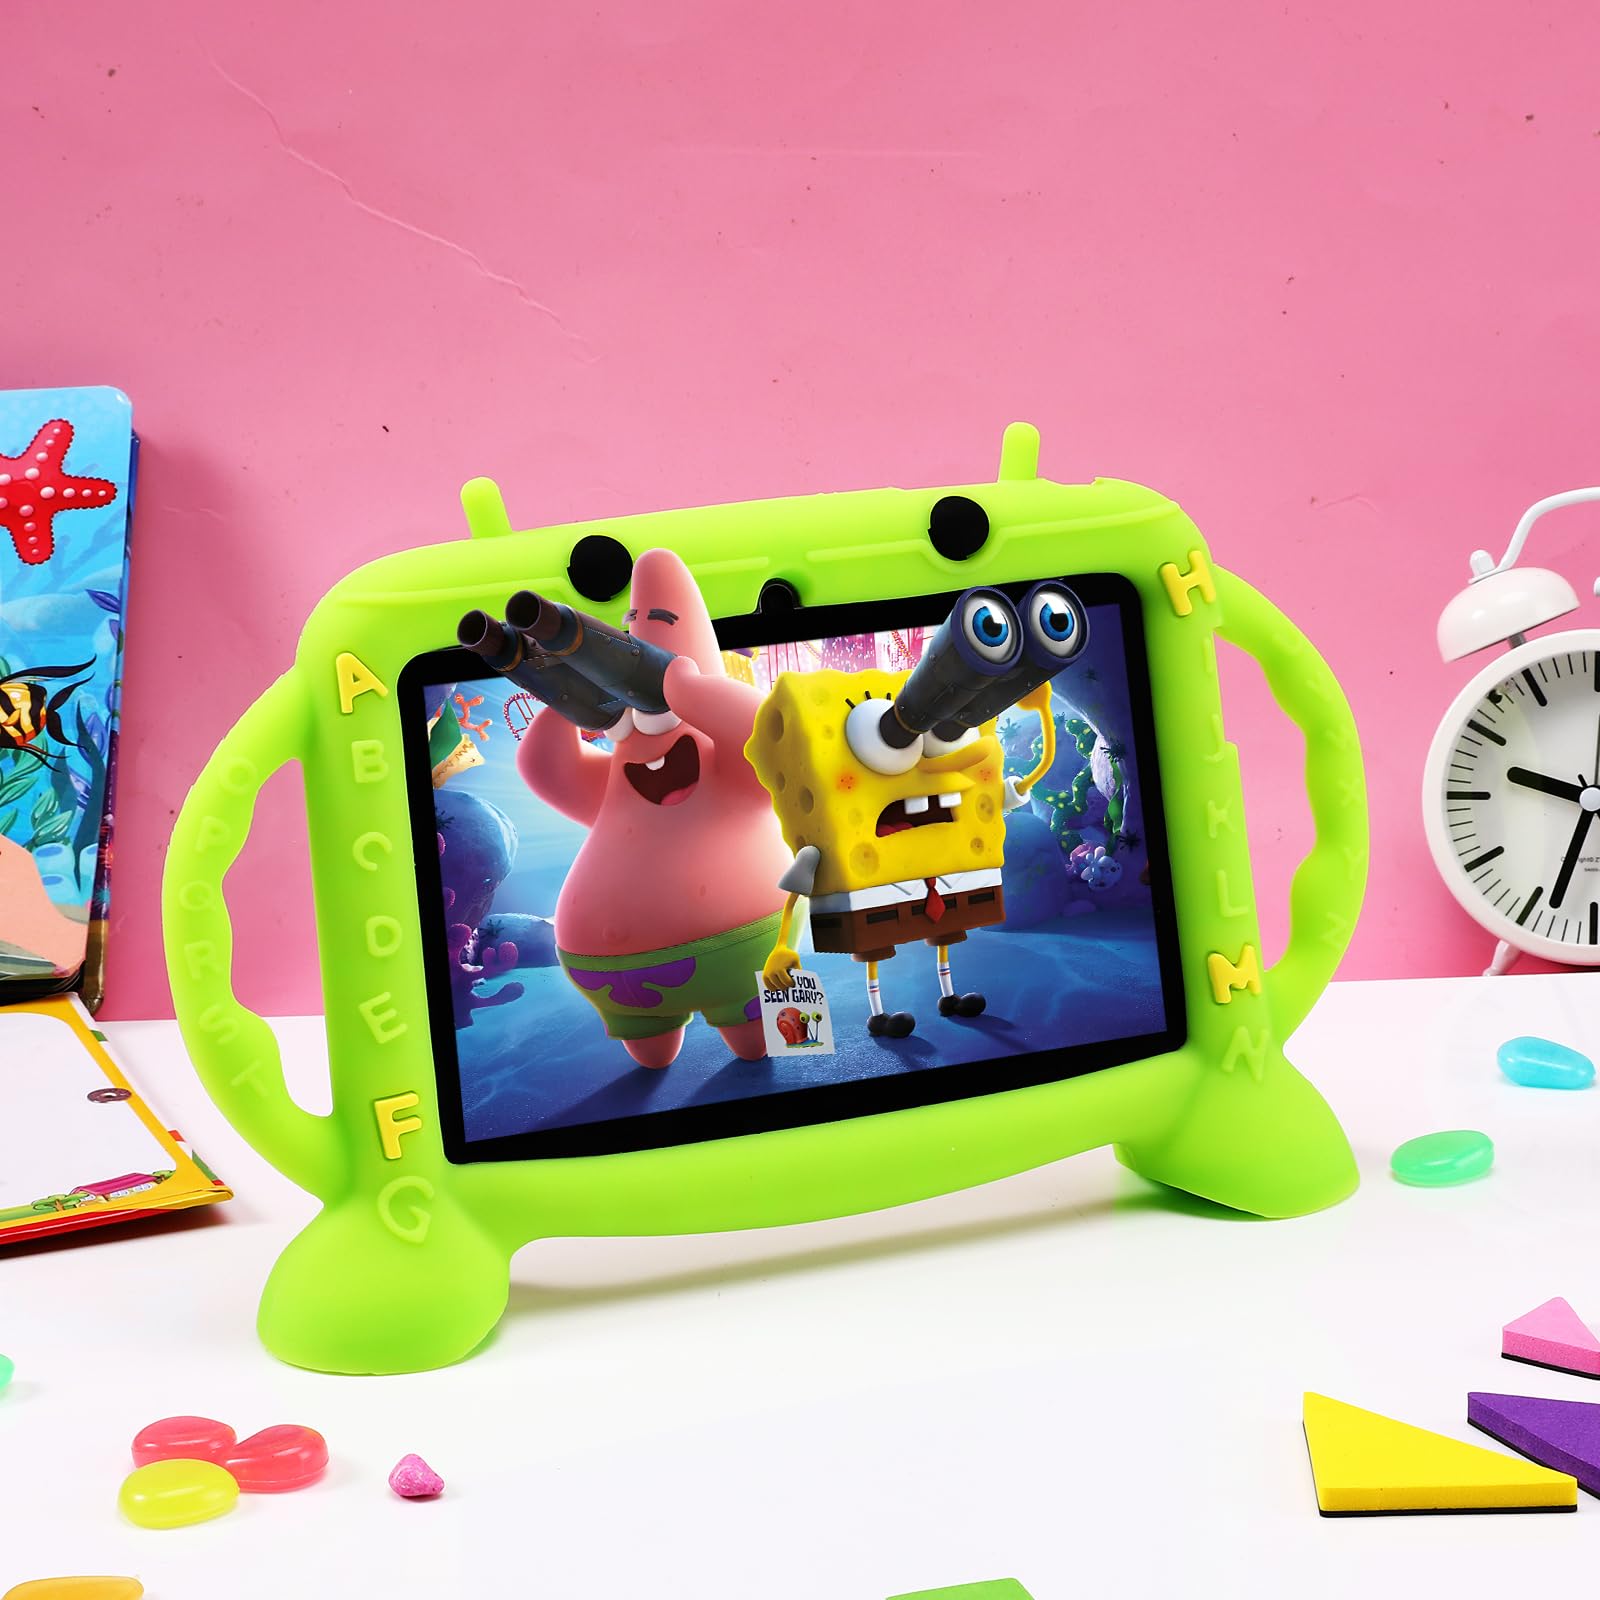 MengDash Kids Tablet, 7 inch Tablet for Kids 2-10, Educational Learning Toddler Tablet Android 11, 3GB RAM+32GB ROM Storage, Google Play YouTube, Baby Girl boy Gift